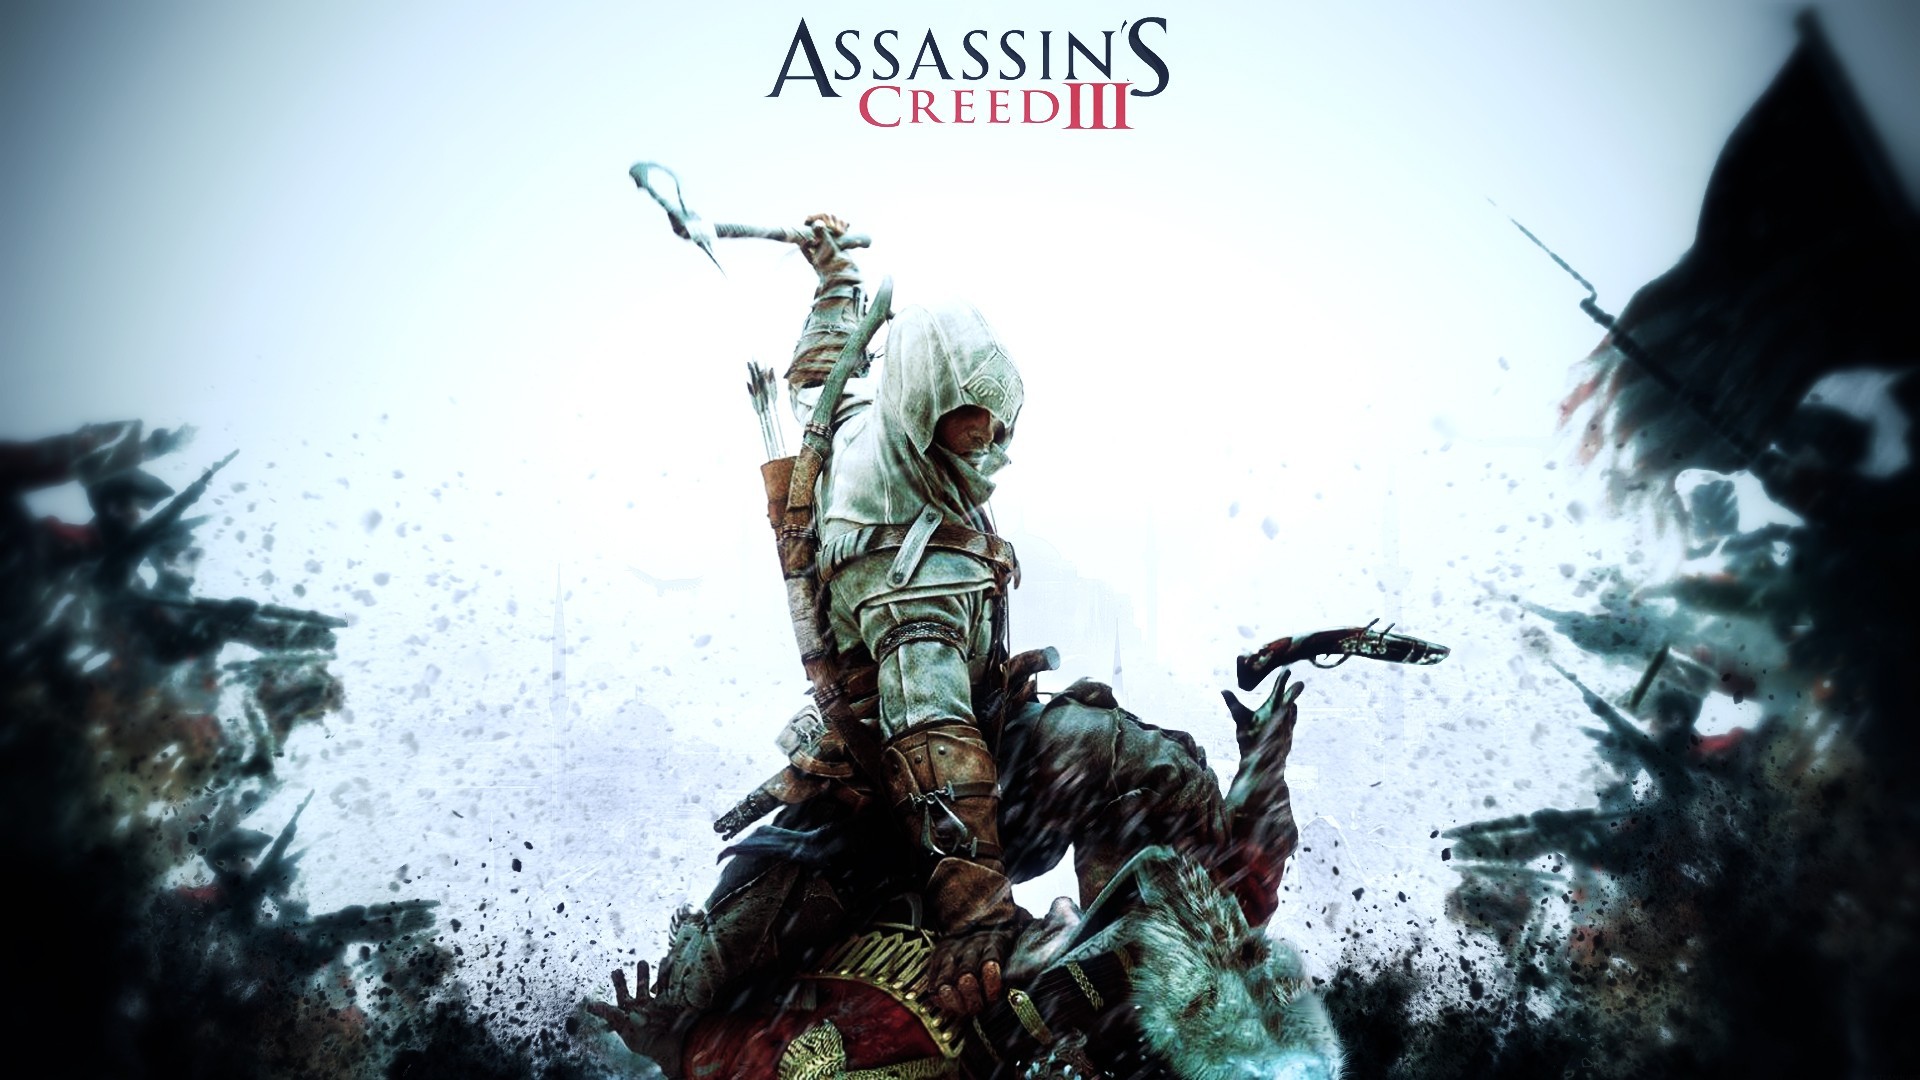 Assassins Creed Iii Connor Kenway Connor Kenway American Revolution Video Games Assassins Creed 1920x1080